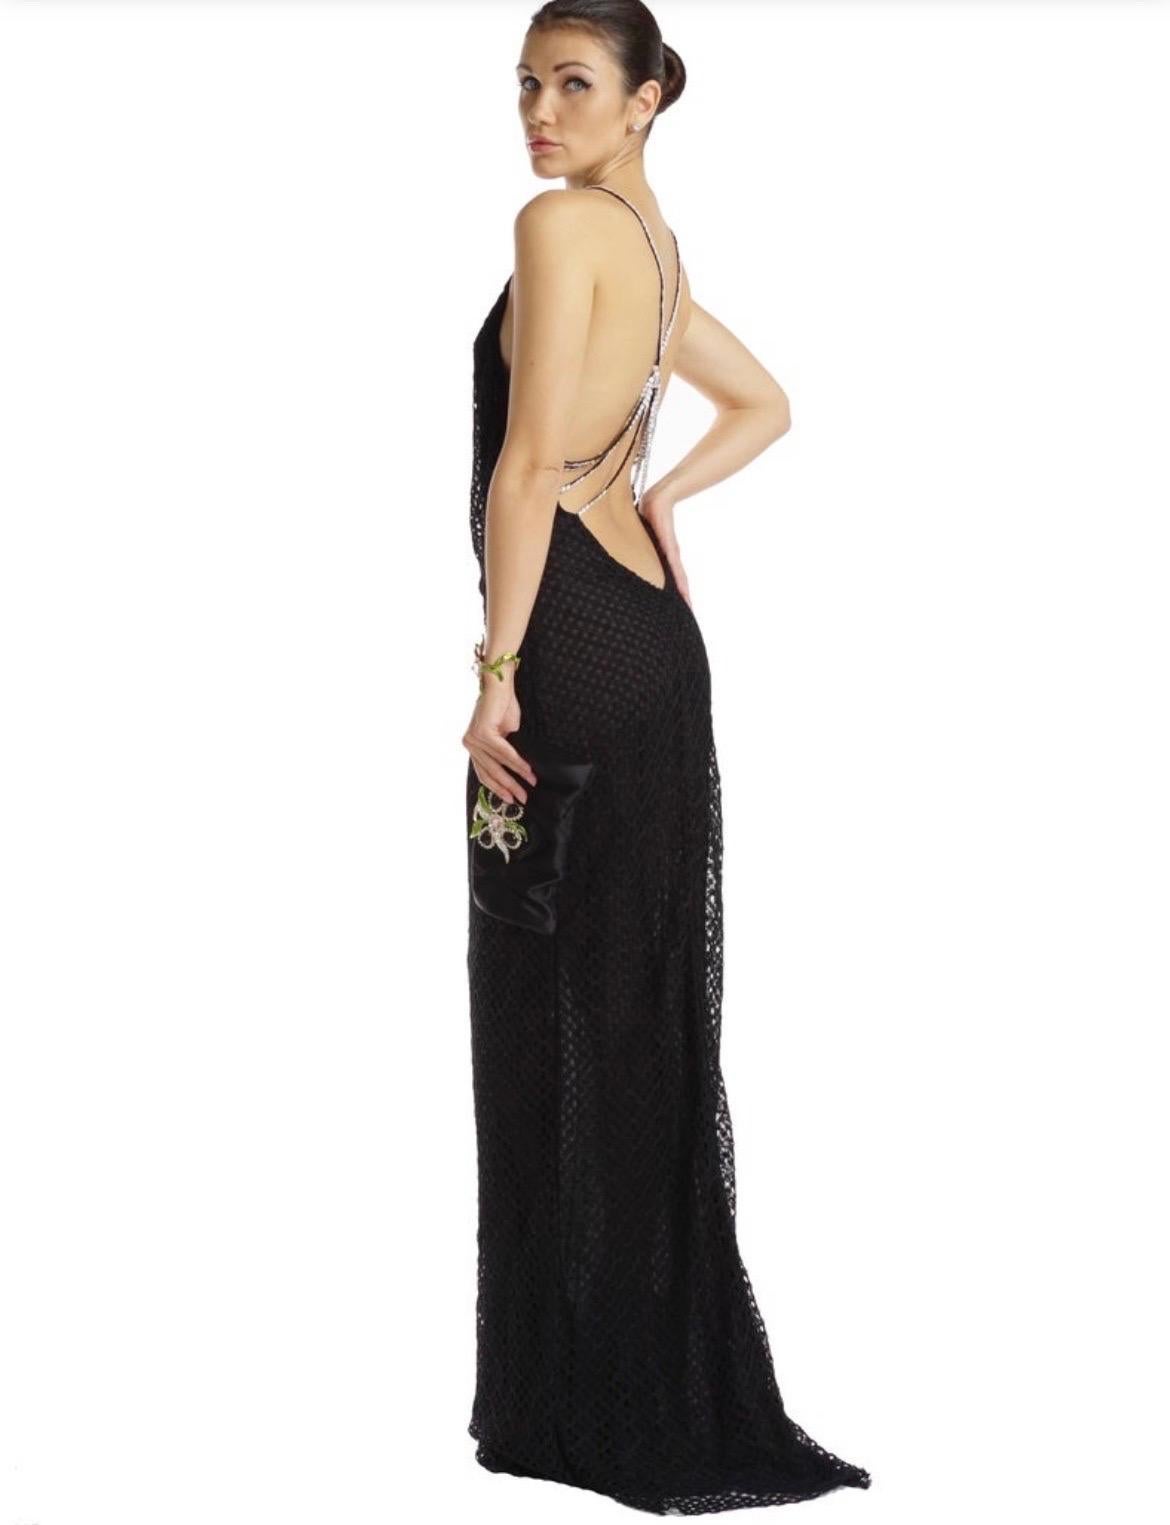 Women's 2002 Gianni Versace Couture Vintage Black Gown w/ Crystal Embellished Open Back For Sale